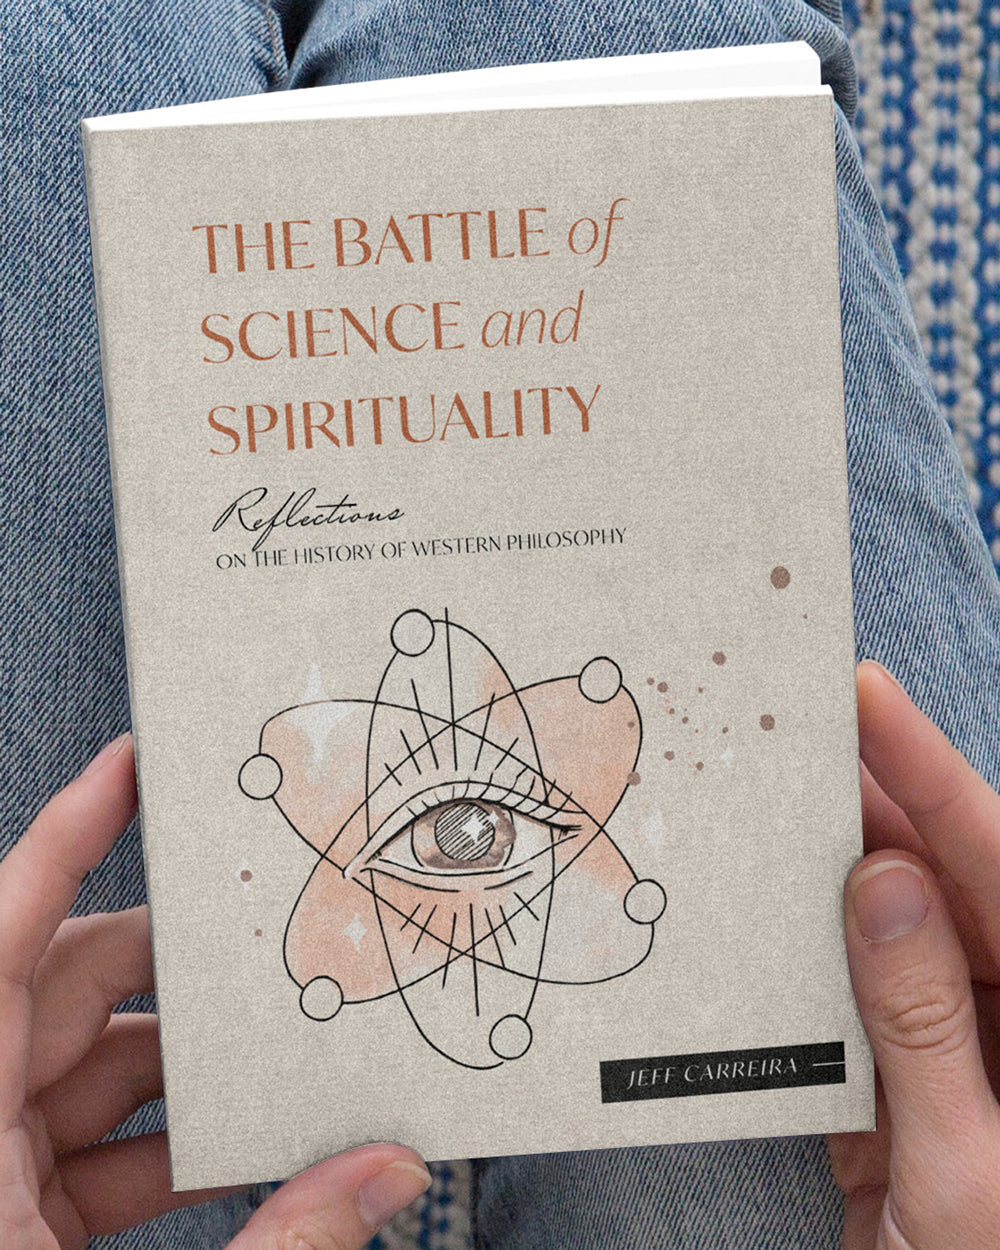 The Battle of Science and Spirituality: Reflections on the History of Western Philosophy